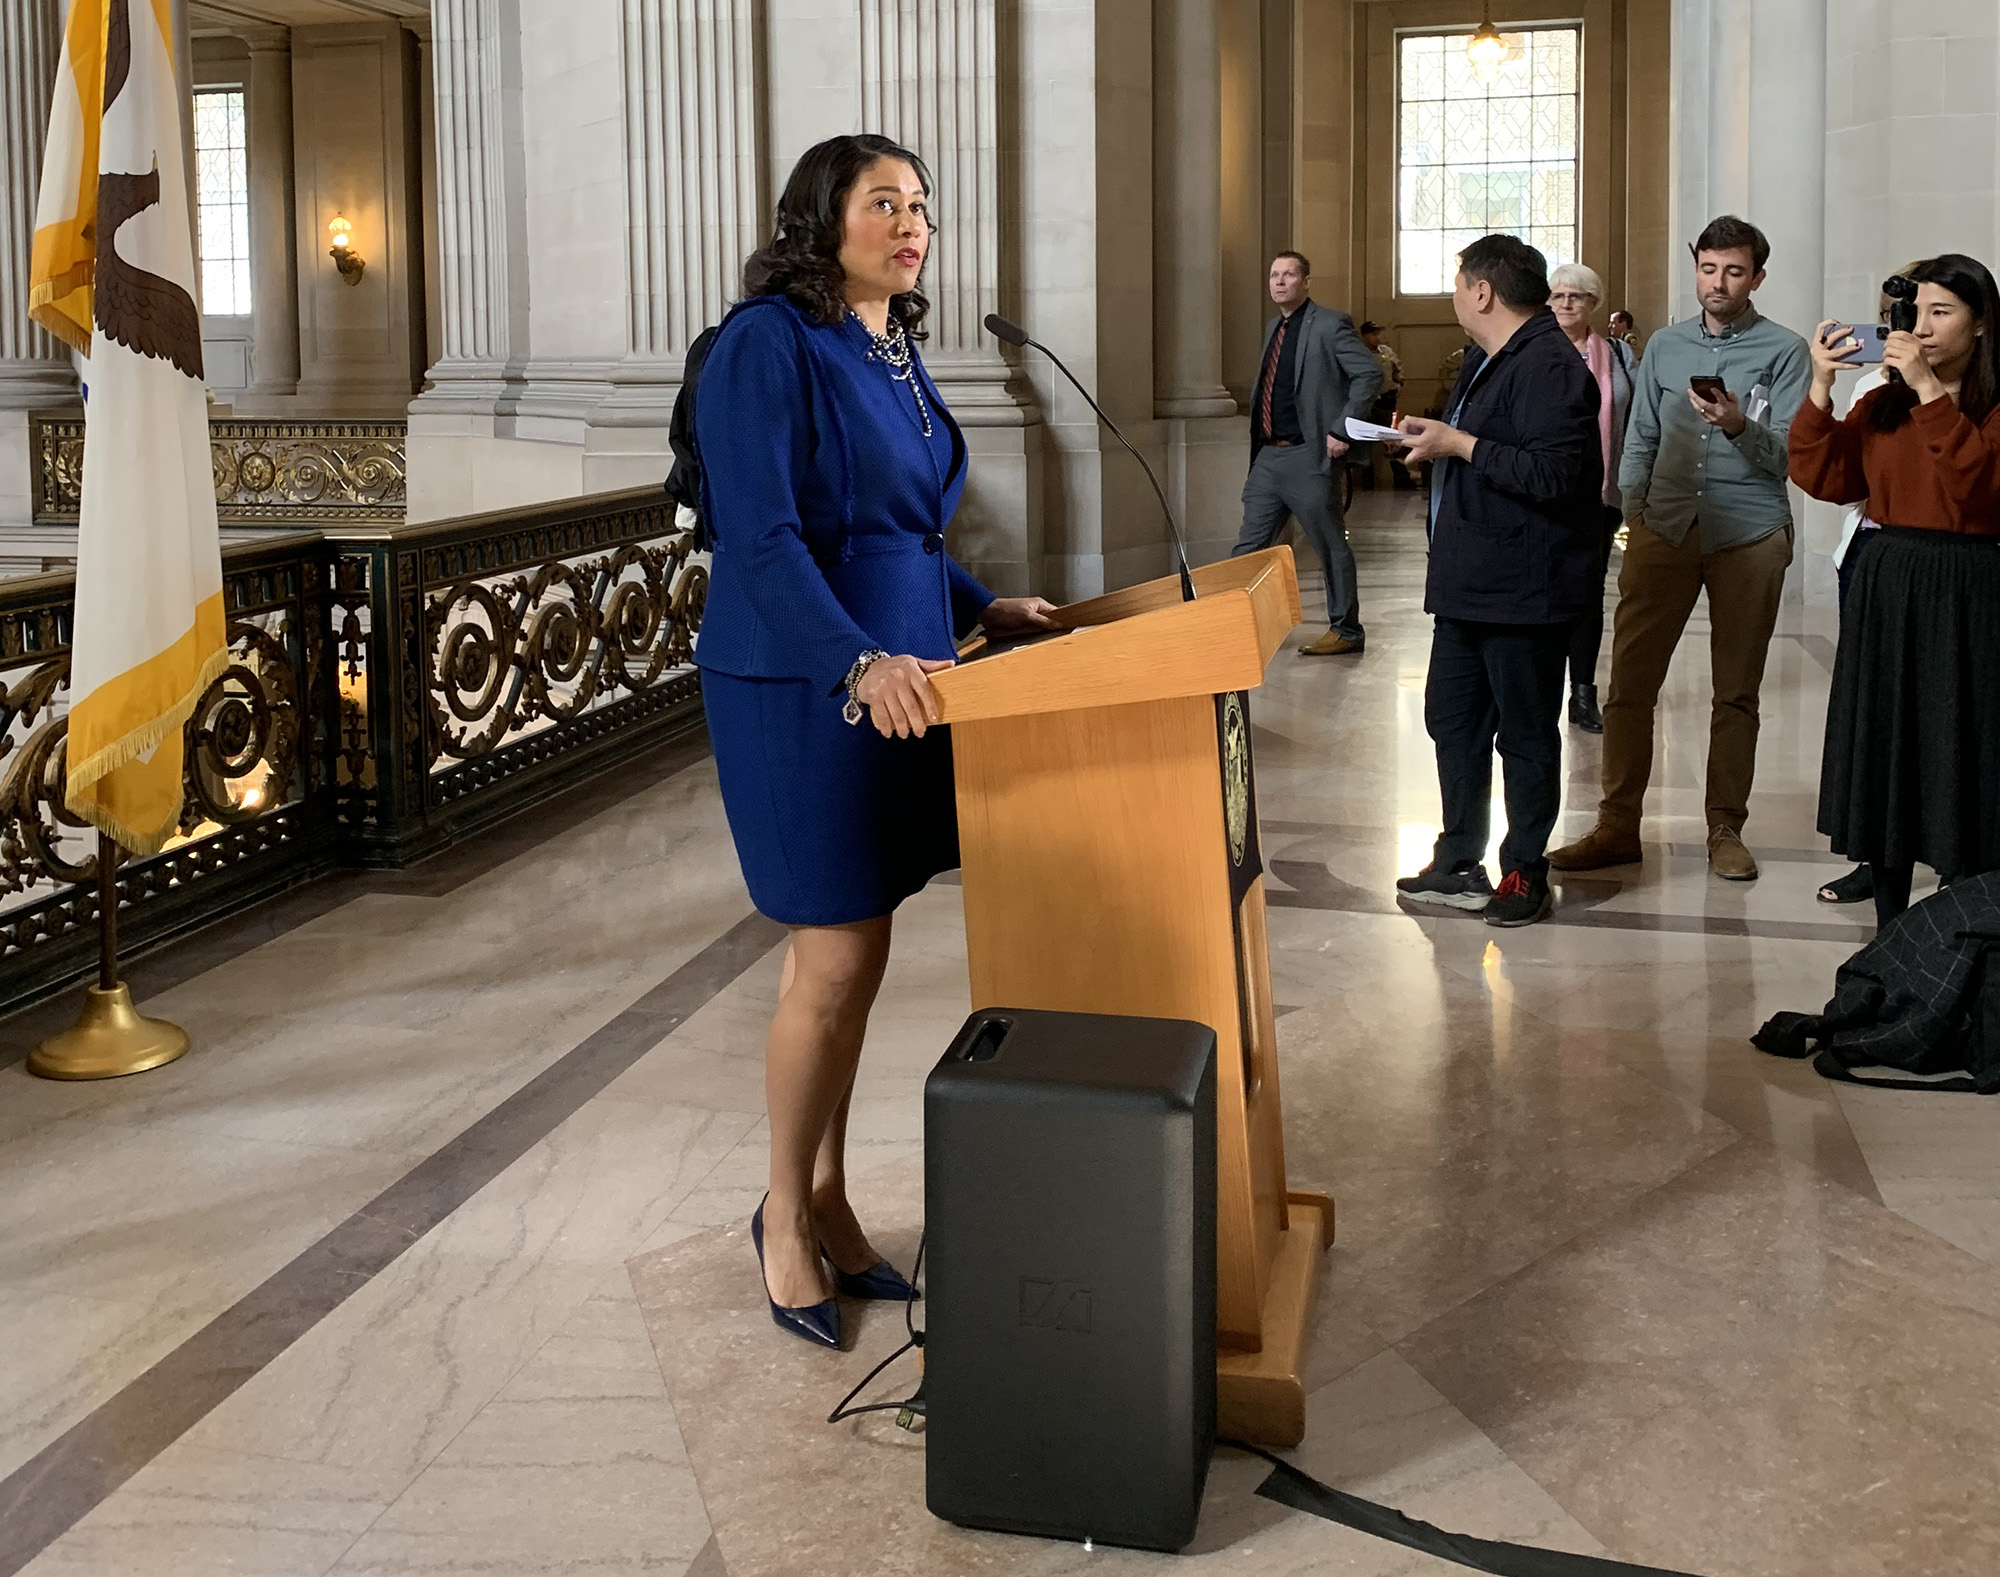 San Francisco Mayor London Breed has picked the next controller for the city-county, local officials said. Greg Wagner will replace incumbent Controller Ben Rosenfield, the Mayor’s office said in a statement. Wagner is the current Chief Operating Officer of the San Francisco Department of Public Health.  He also served as SFDPH’s Chief Financial Officer from […]